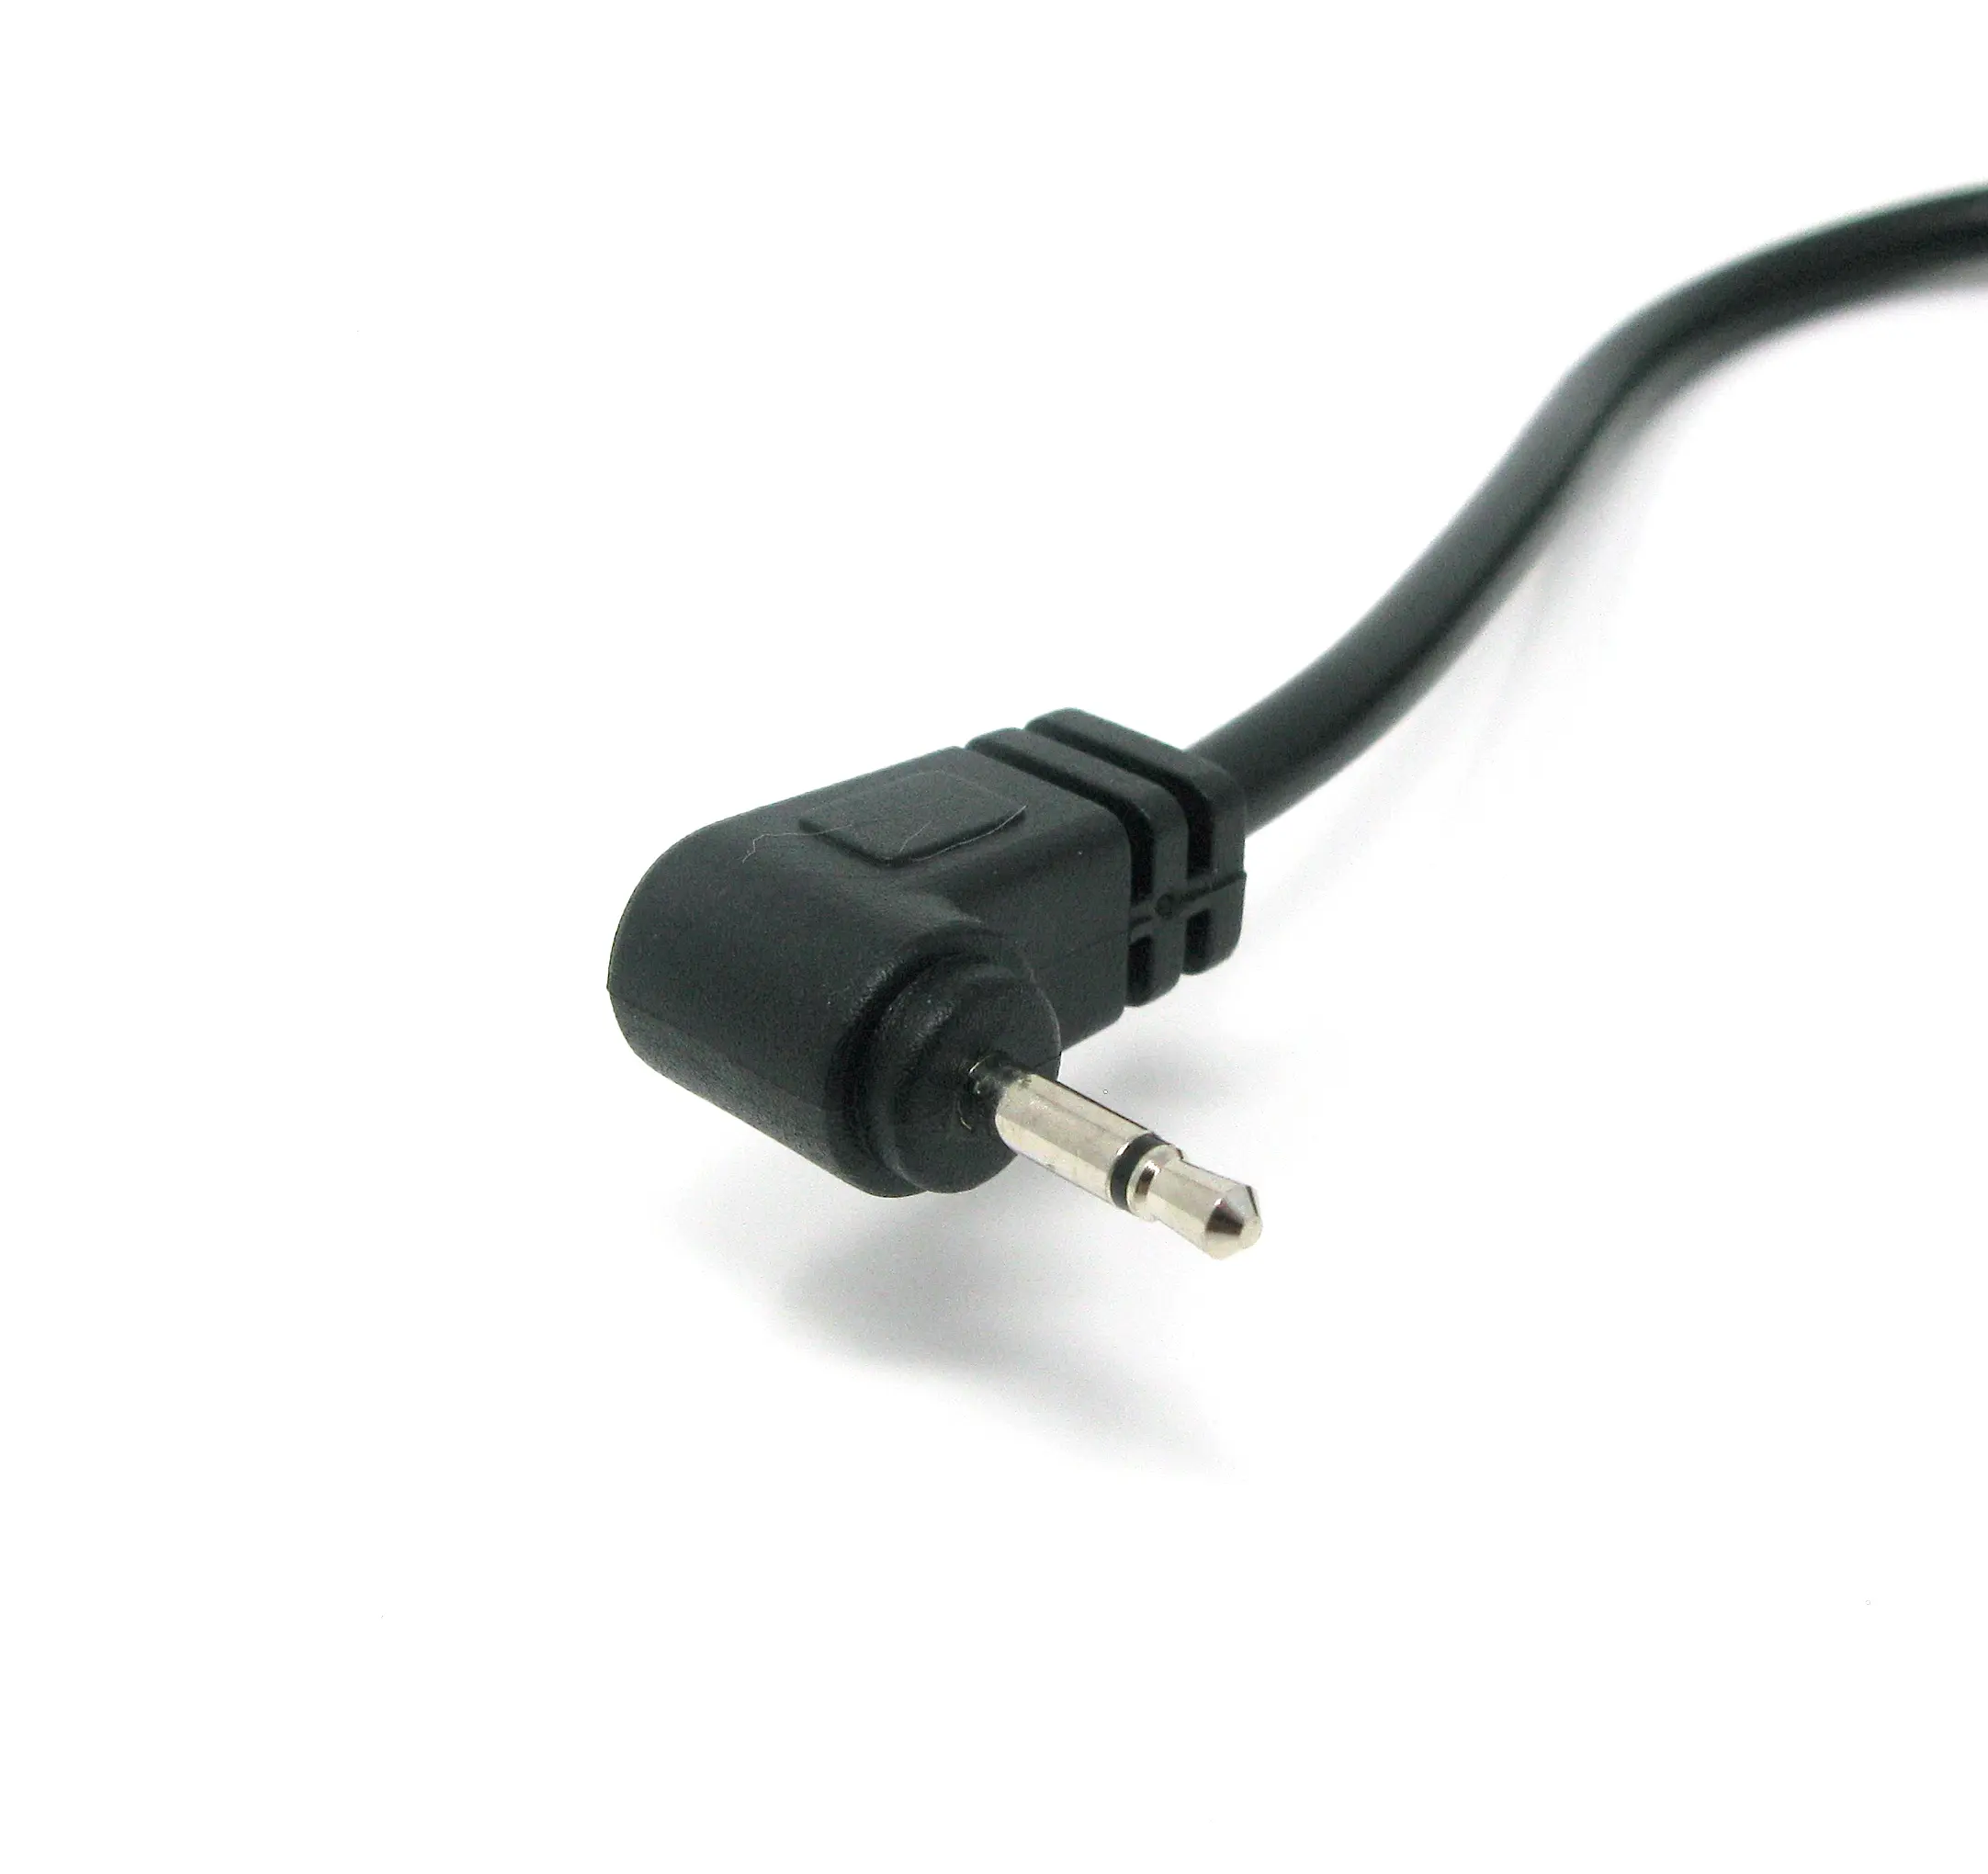 GlobTek offers over-molded versions of 2.5 and 3.5mm phono/phone mono plugs for various types of cables and applications